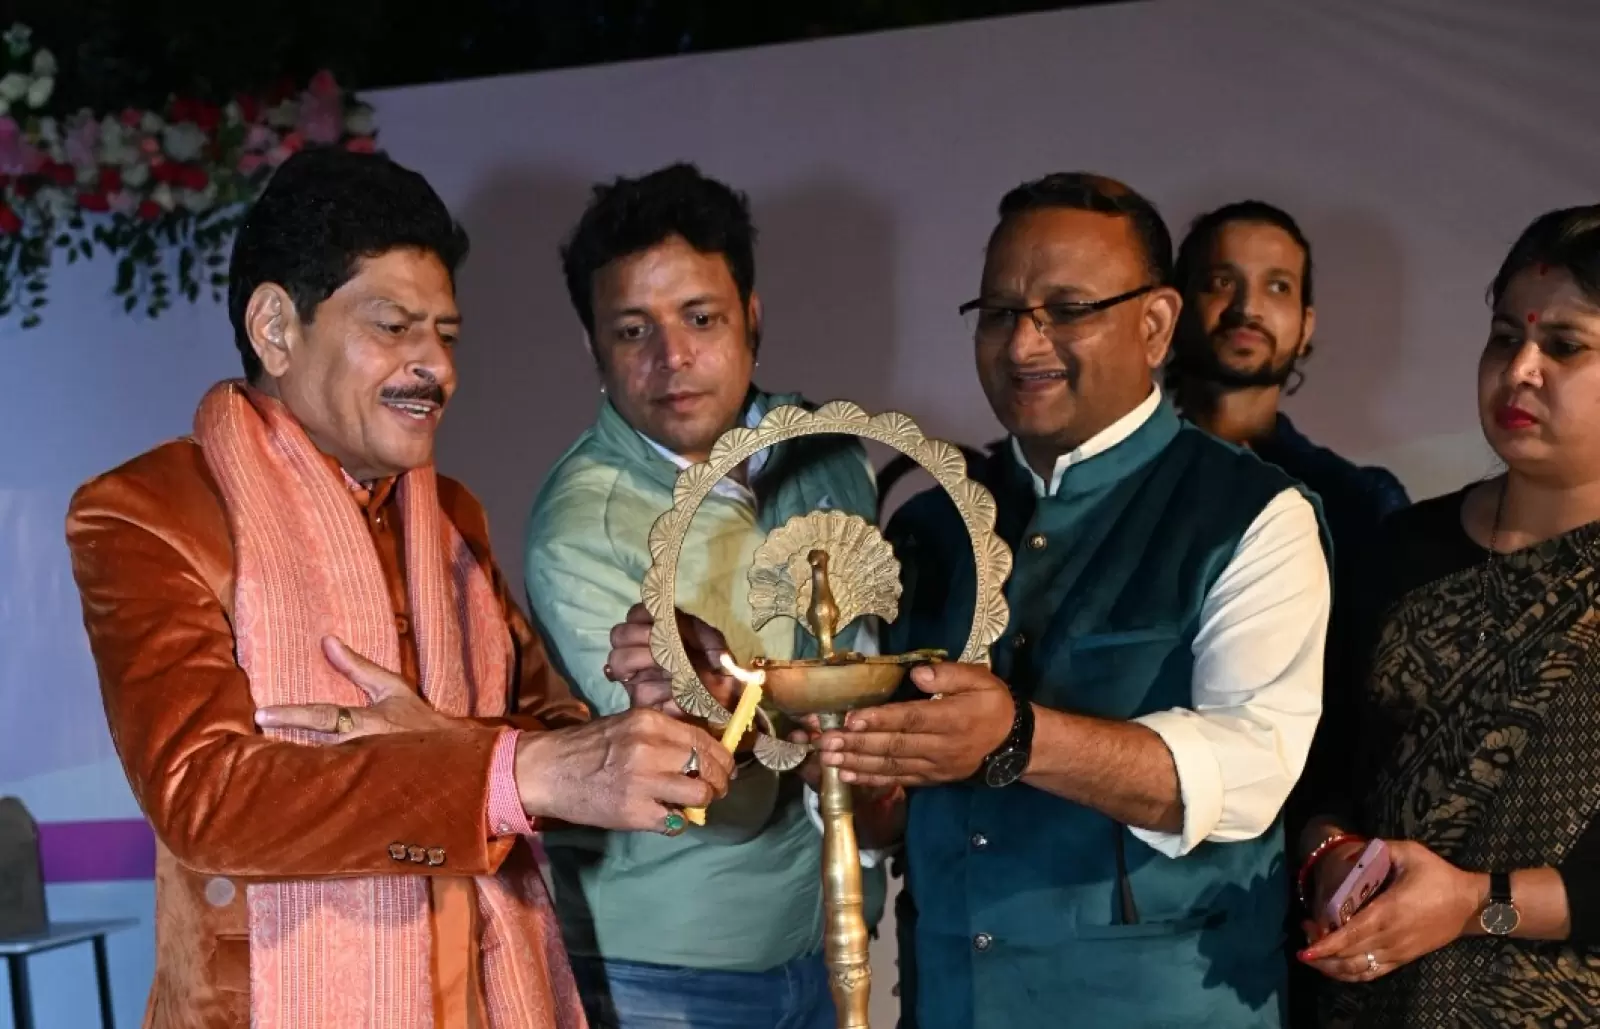 Chief Guest Mr. Gopal Sharma Ignites 'Ellen Design Festival' with Lamp Lighting Ceremony and Prize Distribution